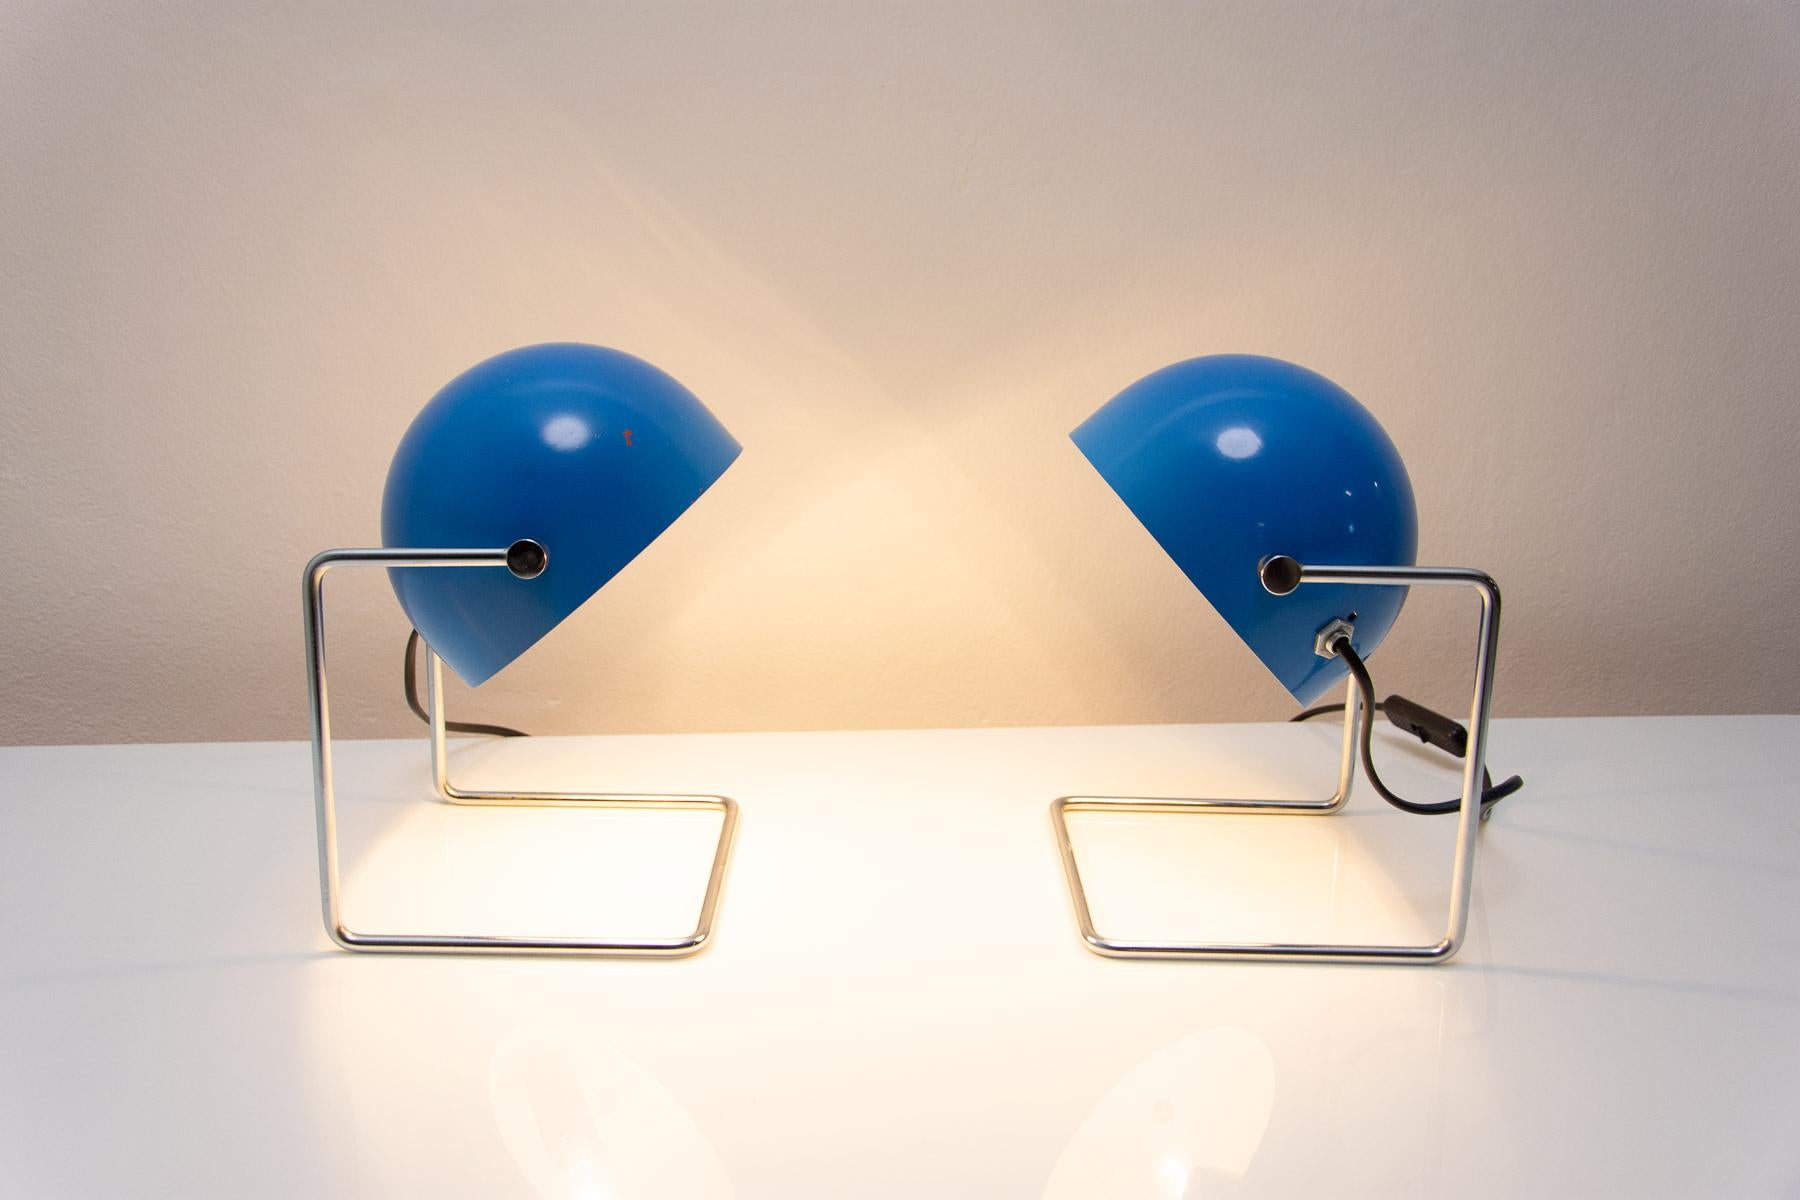  Pair of Midcentury Space-Age Positioning Desk Lamps, 1960s 9